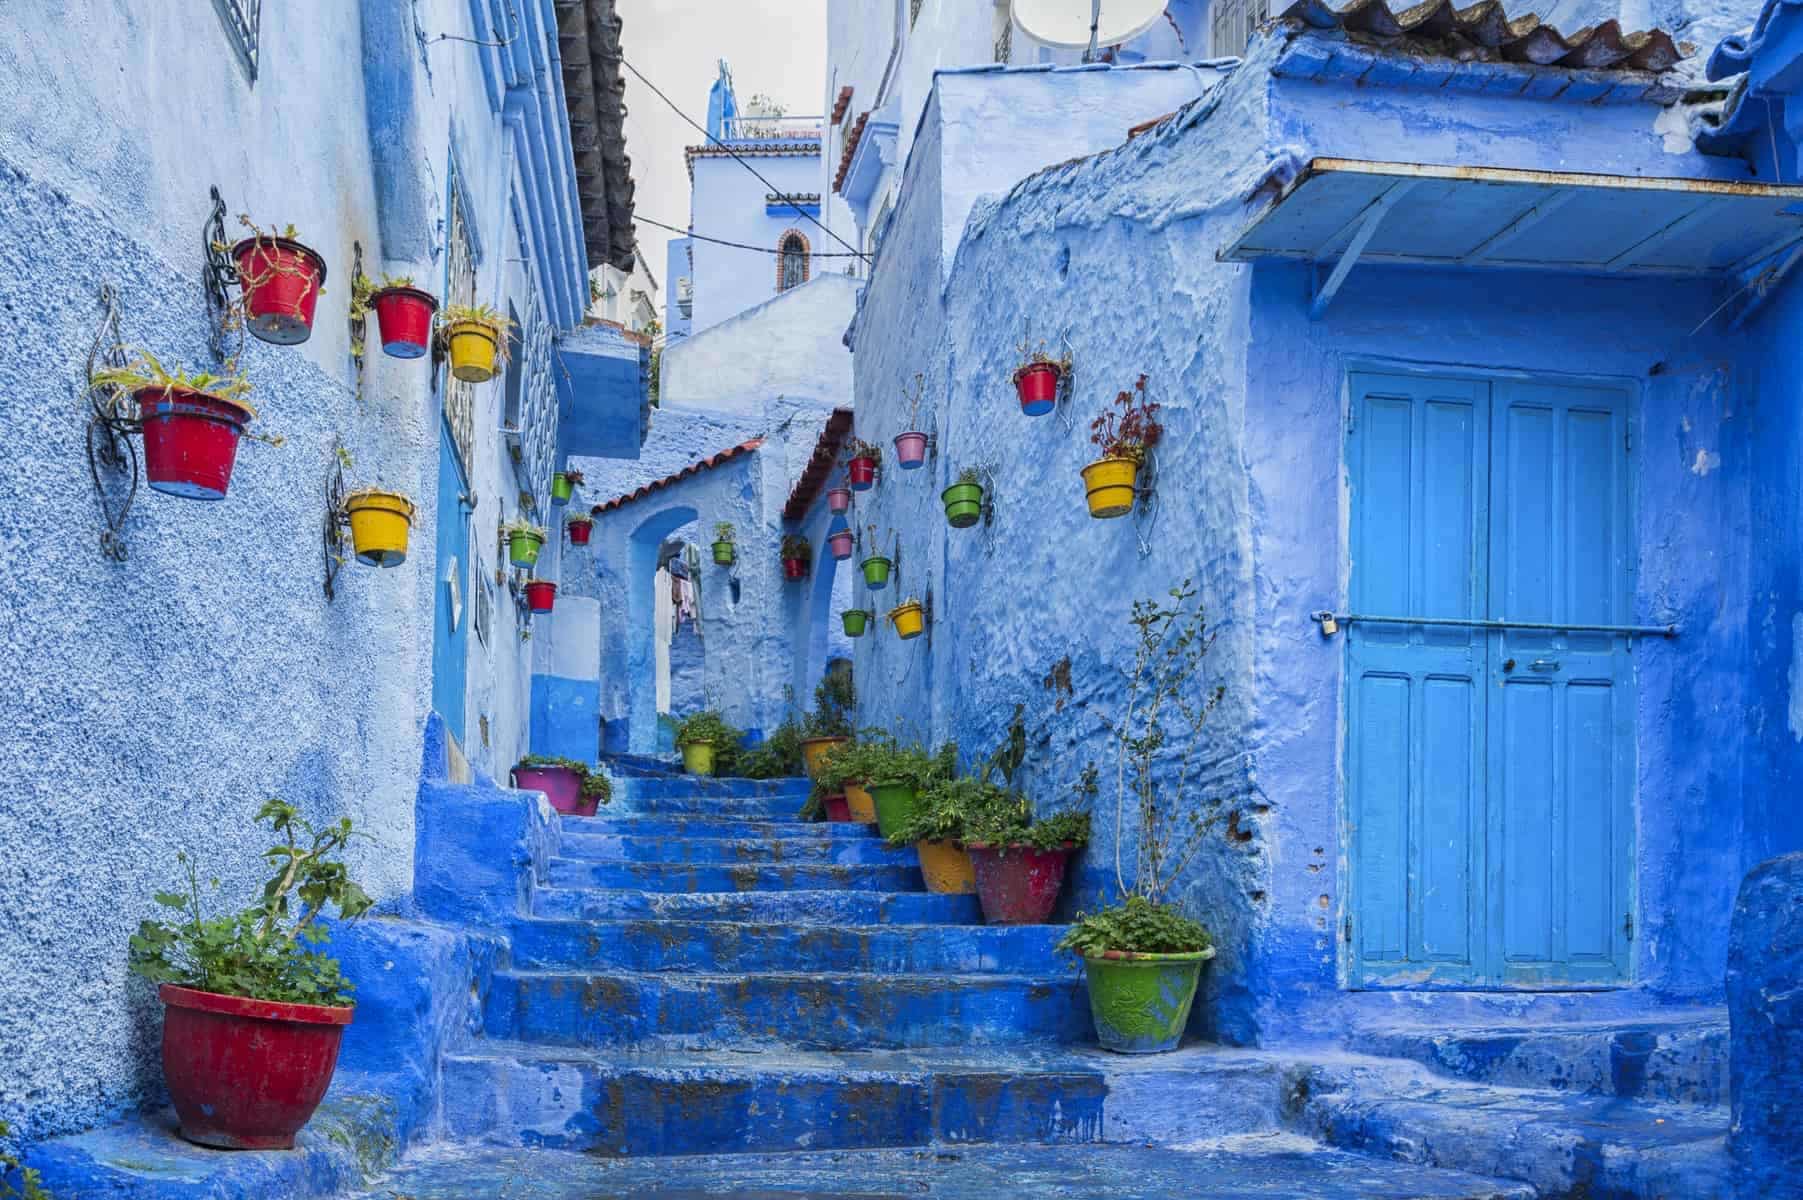 The beautiful blue medina of Chefchaouen, the pearl of Morocco - North Africa